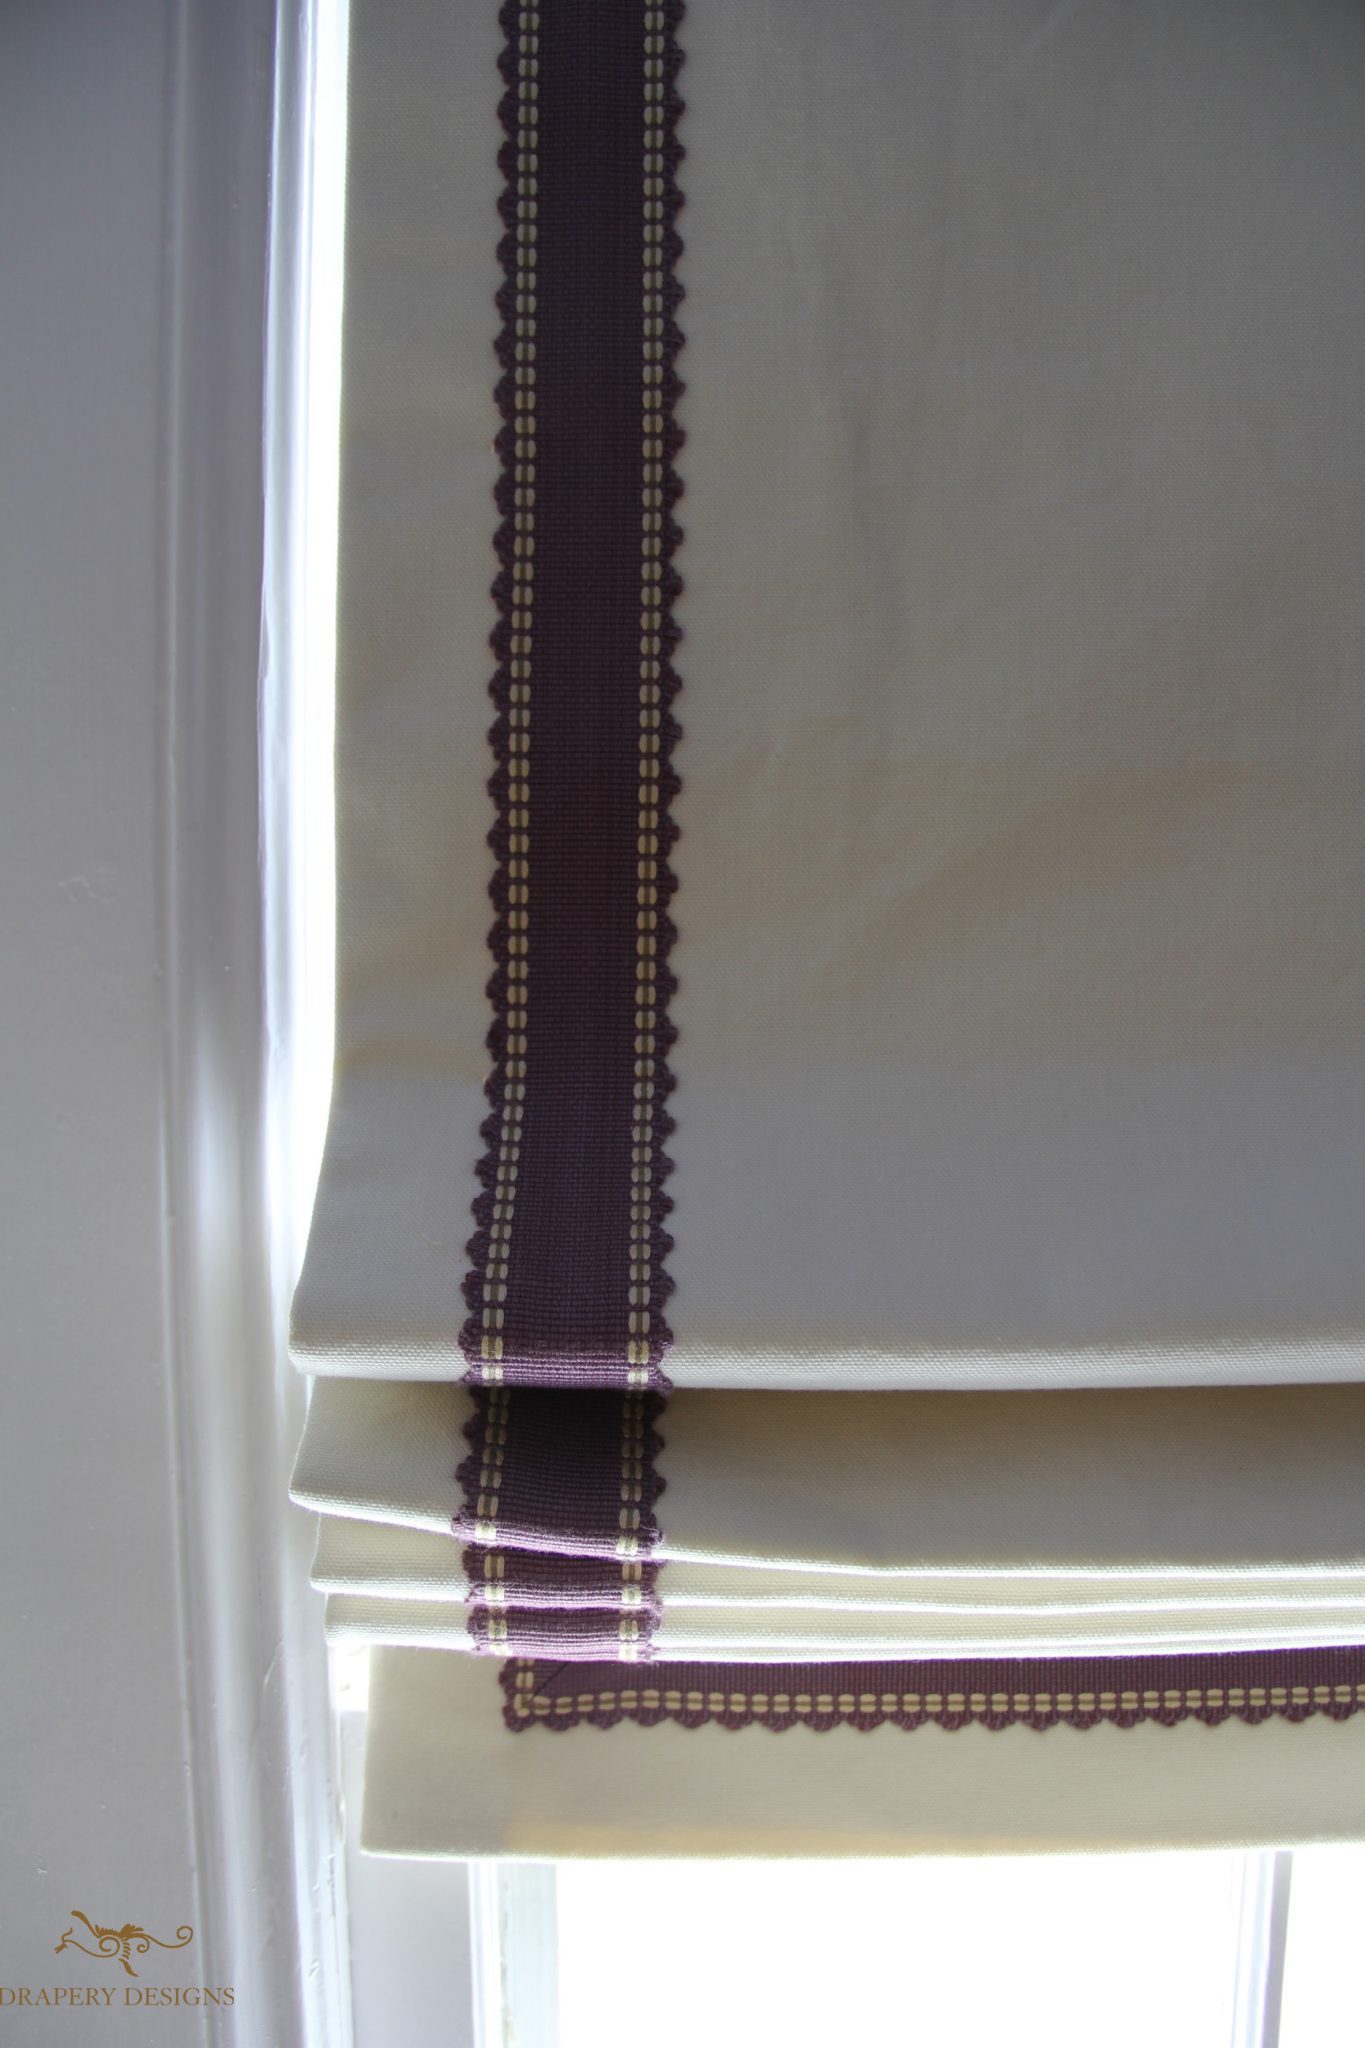 Black out lined roman shades with contrast trim on edges